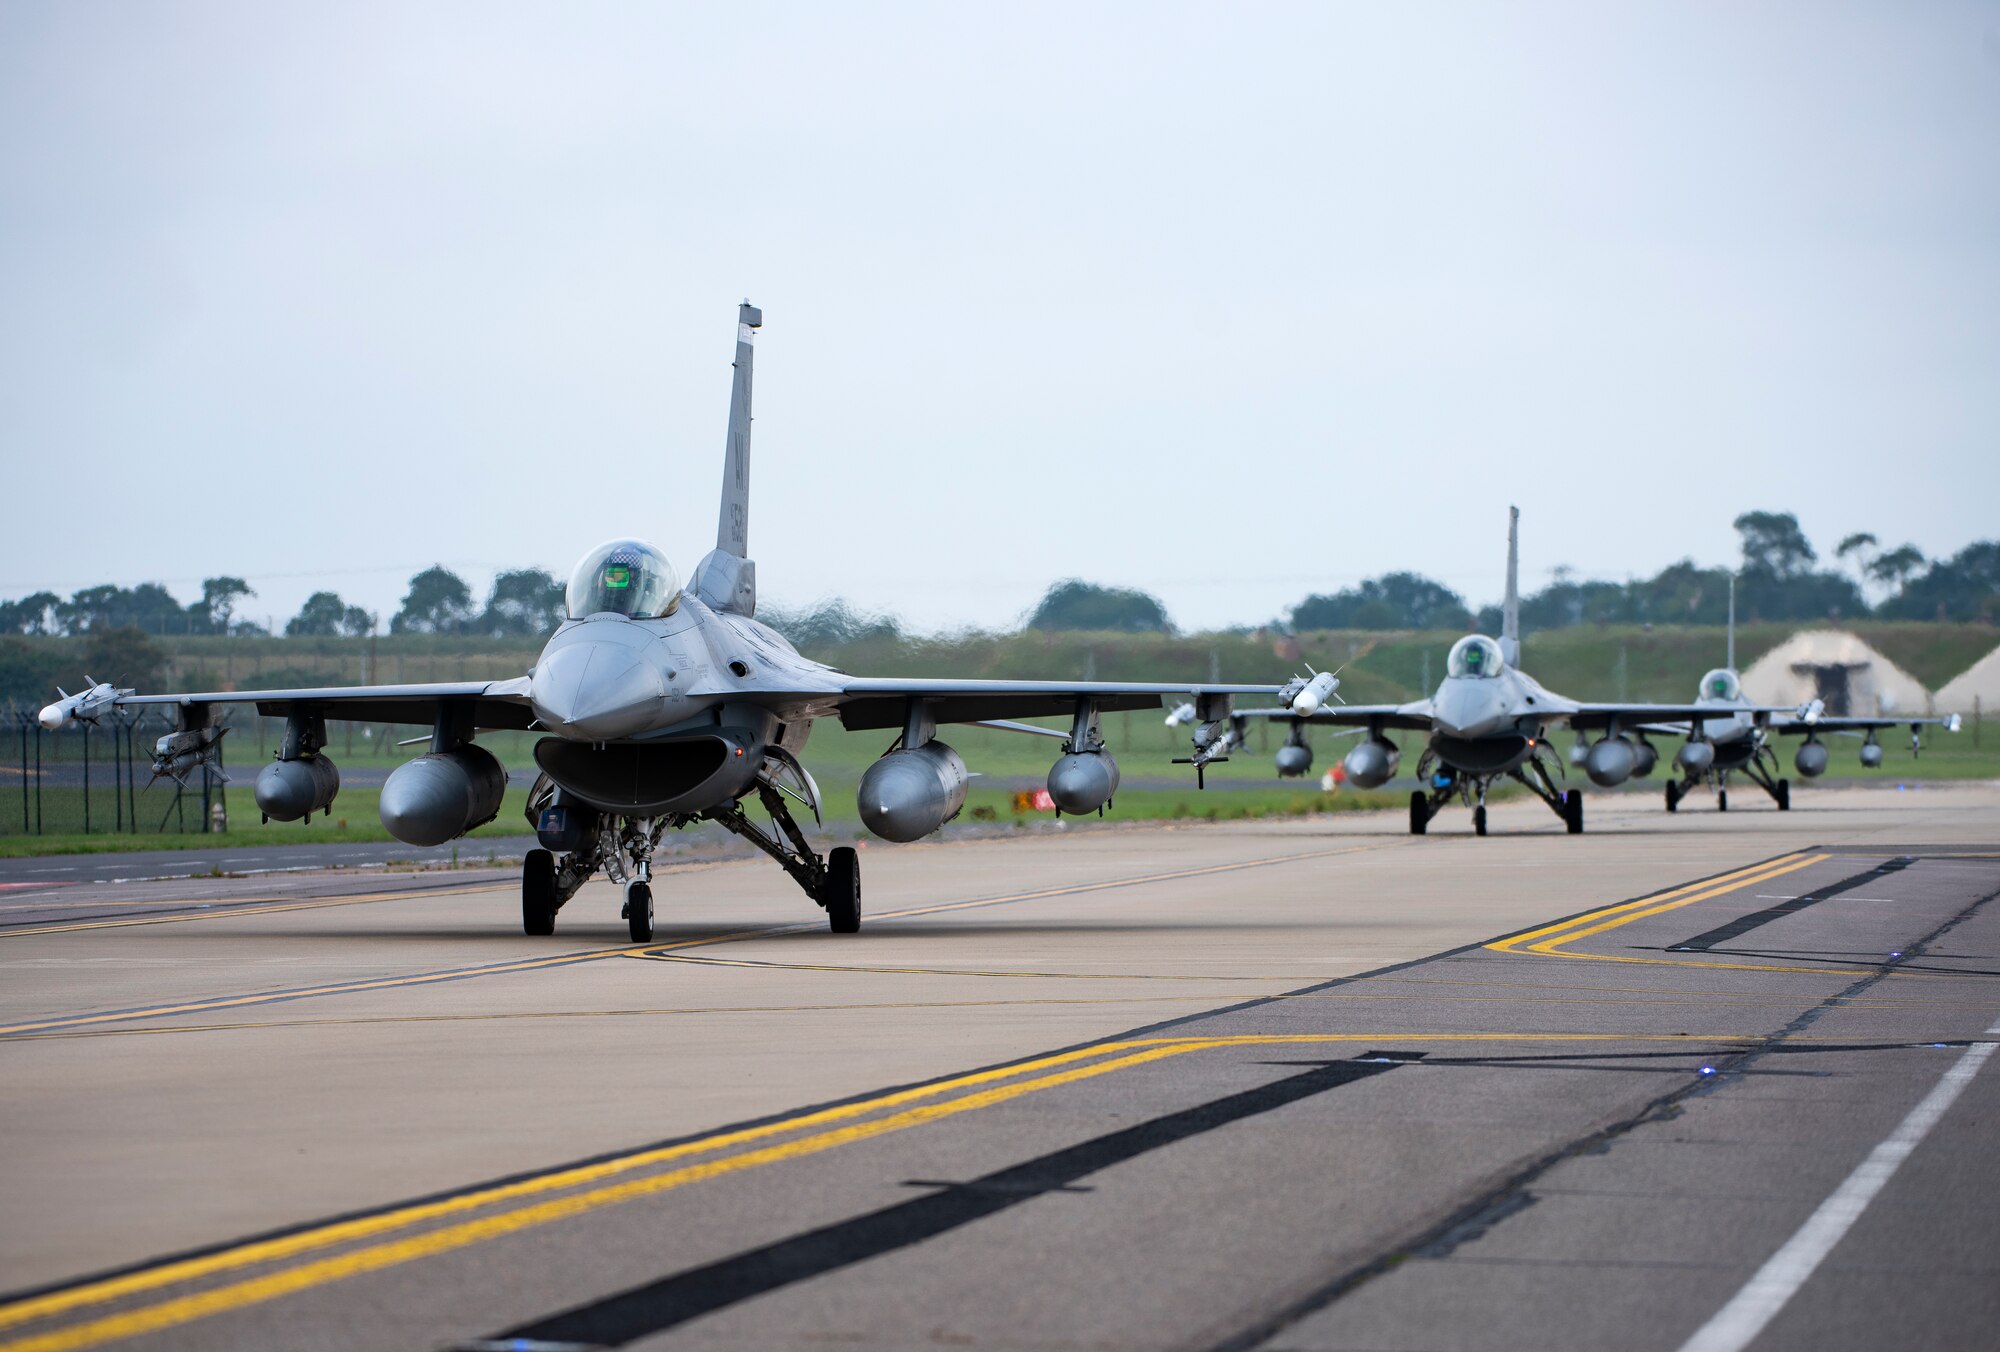 U.S. Air Force F-16 Fighting Falcons, assigned to the 510th Fighter Squadron, Aviano Air Base, Italy, arrive at Royal Air Force Lakenheath, England, Aug. 28, 2020. Aircraft and Airmen from the 510th FS are participating in a flying training deployment event to enhance interoperability, maintain joint readiness and strengthen relationships with regional allies and partners. (U.S. Air Force photo by Airman 1st Class Jessi Monte)